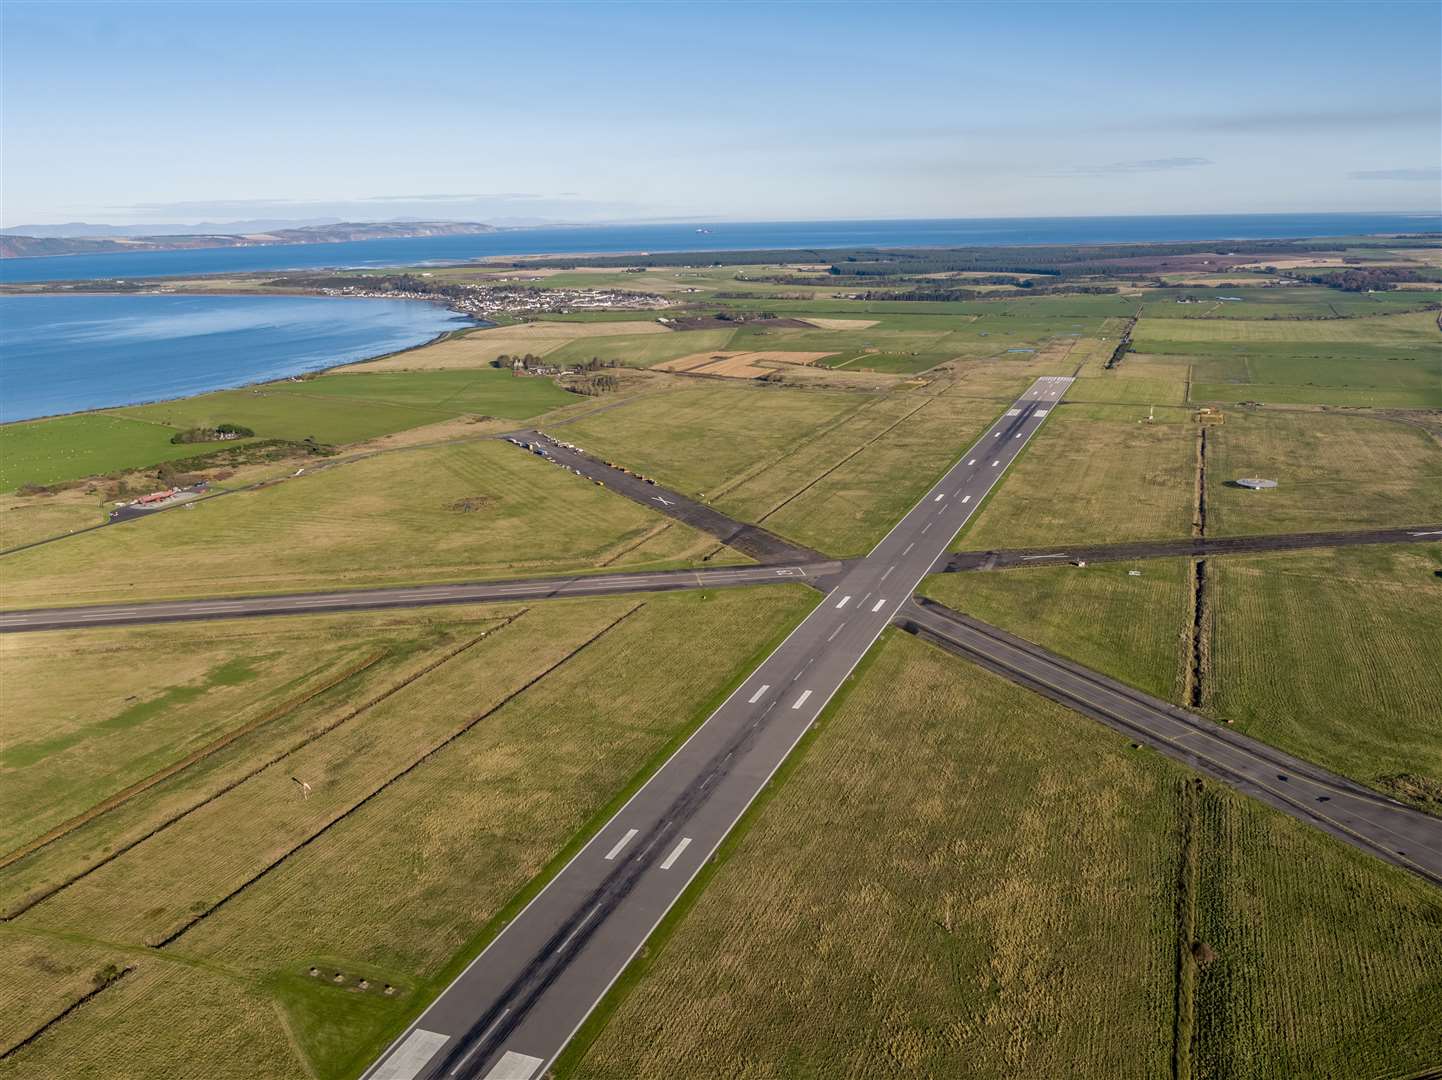 Highlands and Islands Airports Limited (HIAL) has invested over £4 million in energy efficient runway lighting for Inverness Airport.